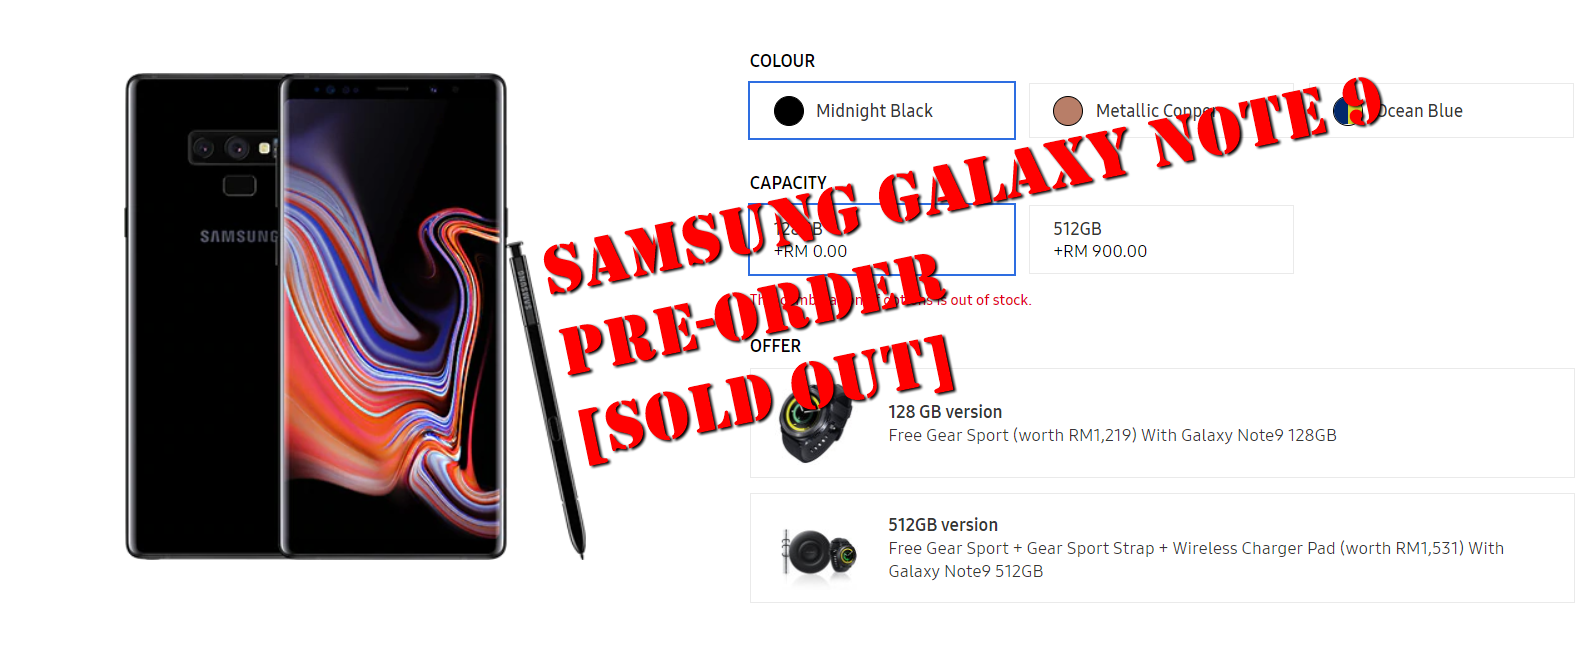 Pre-order for all three Samsung Galaxy Note 9 colour models sold out